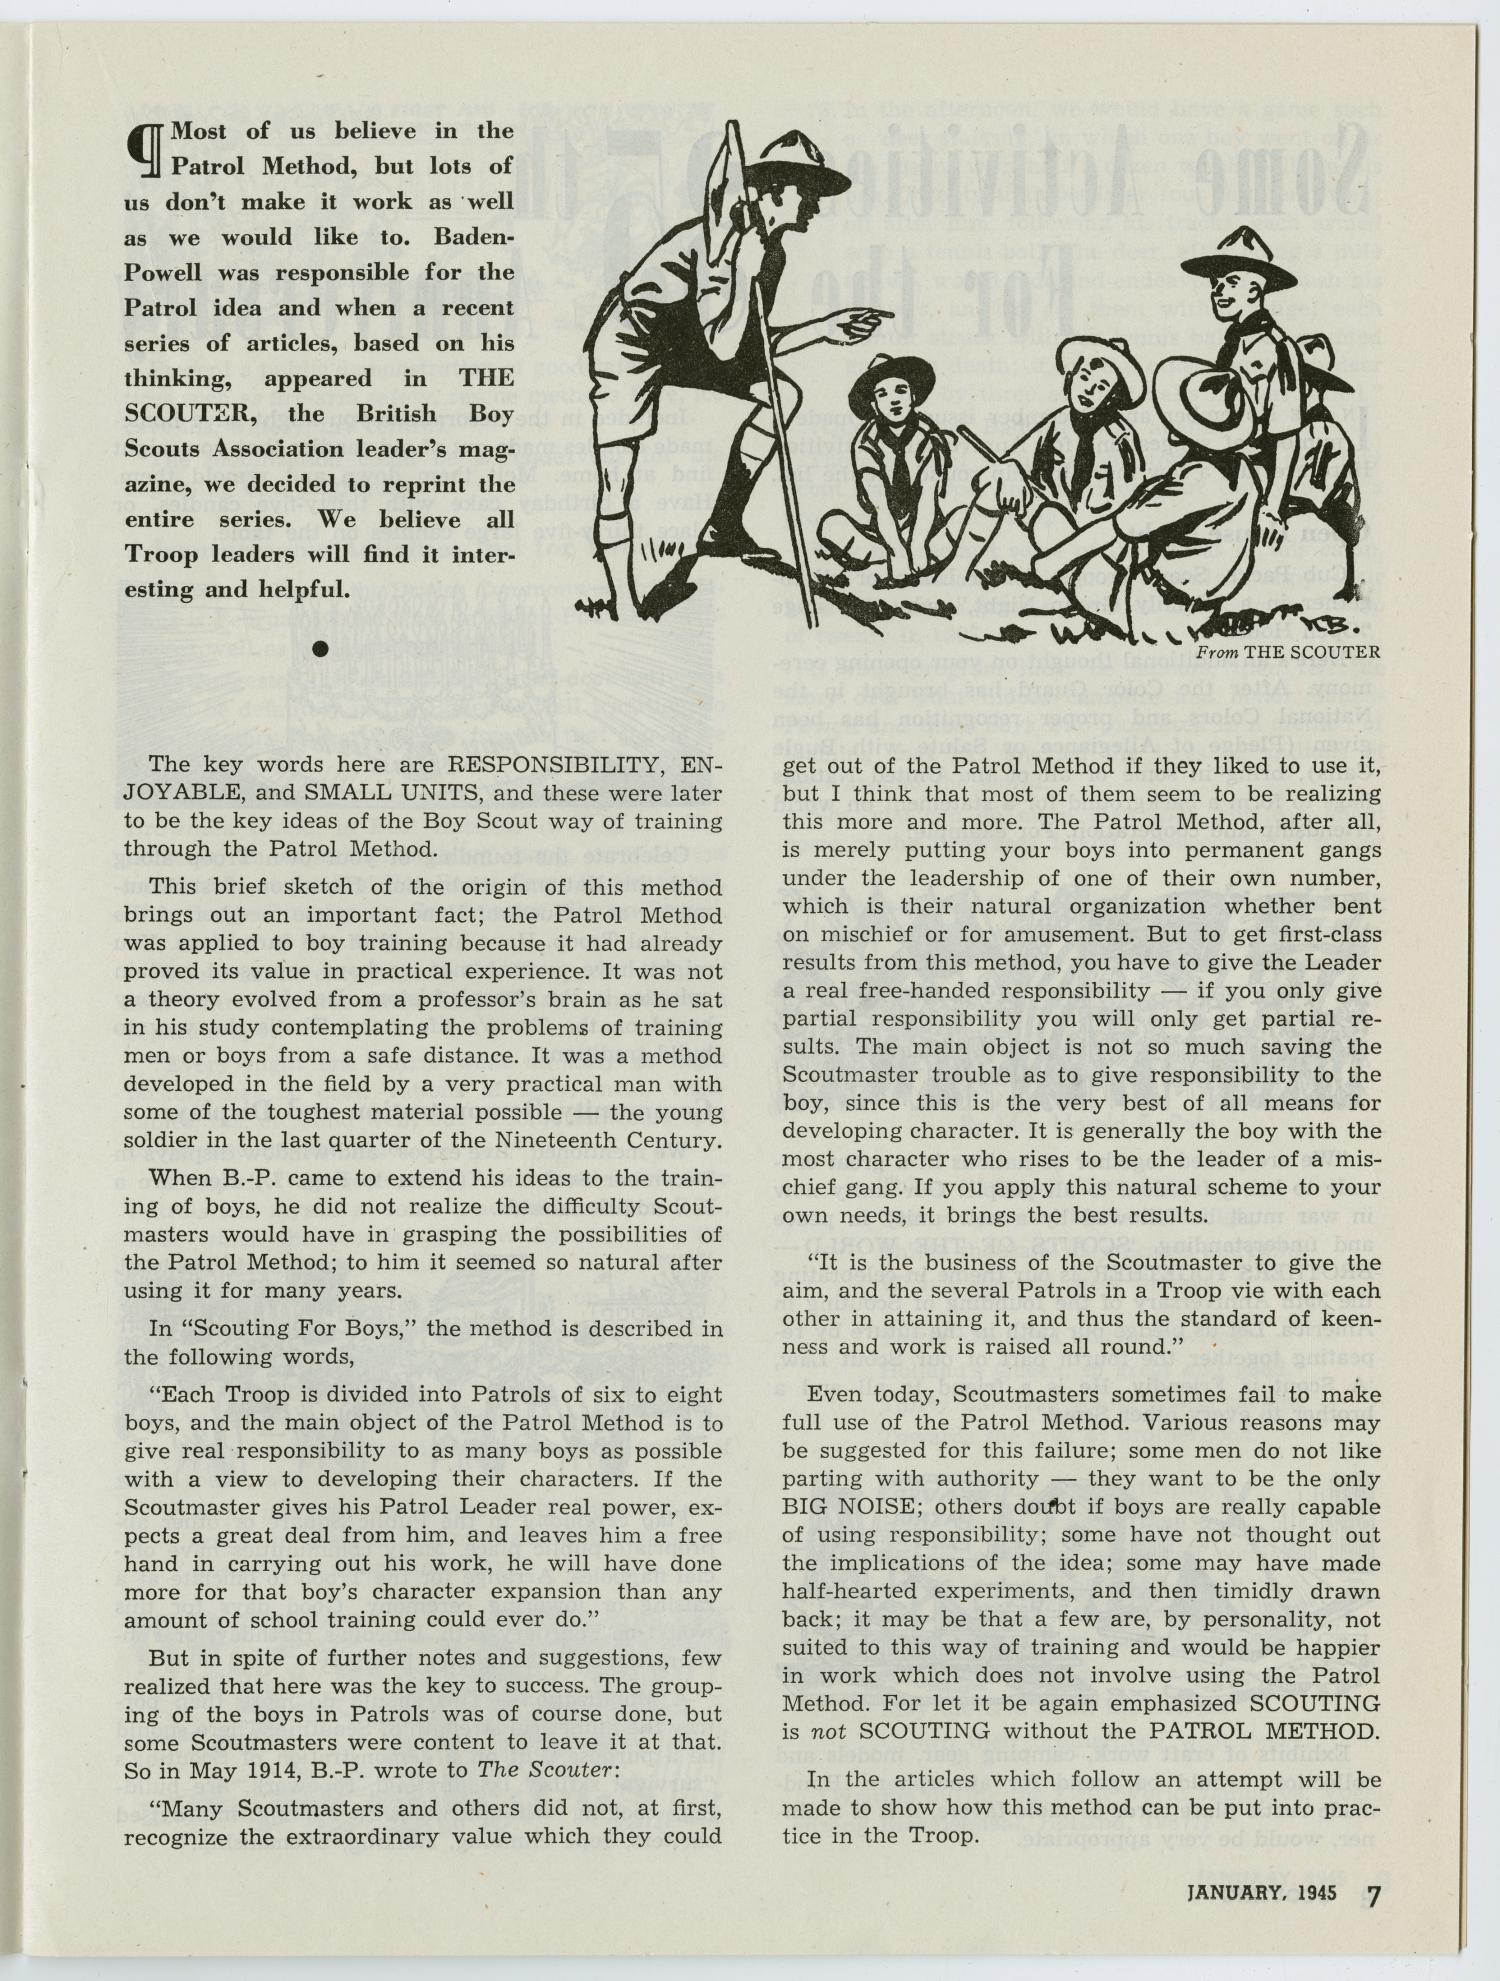 Scouting, Volume 33, Number 1, January 1945
                                                
                                                    7
                                                